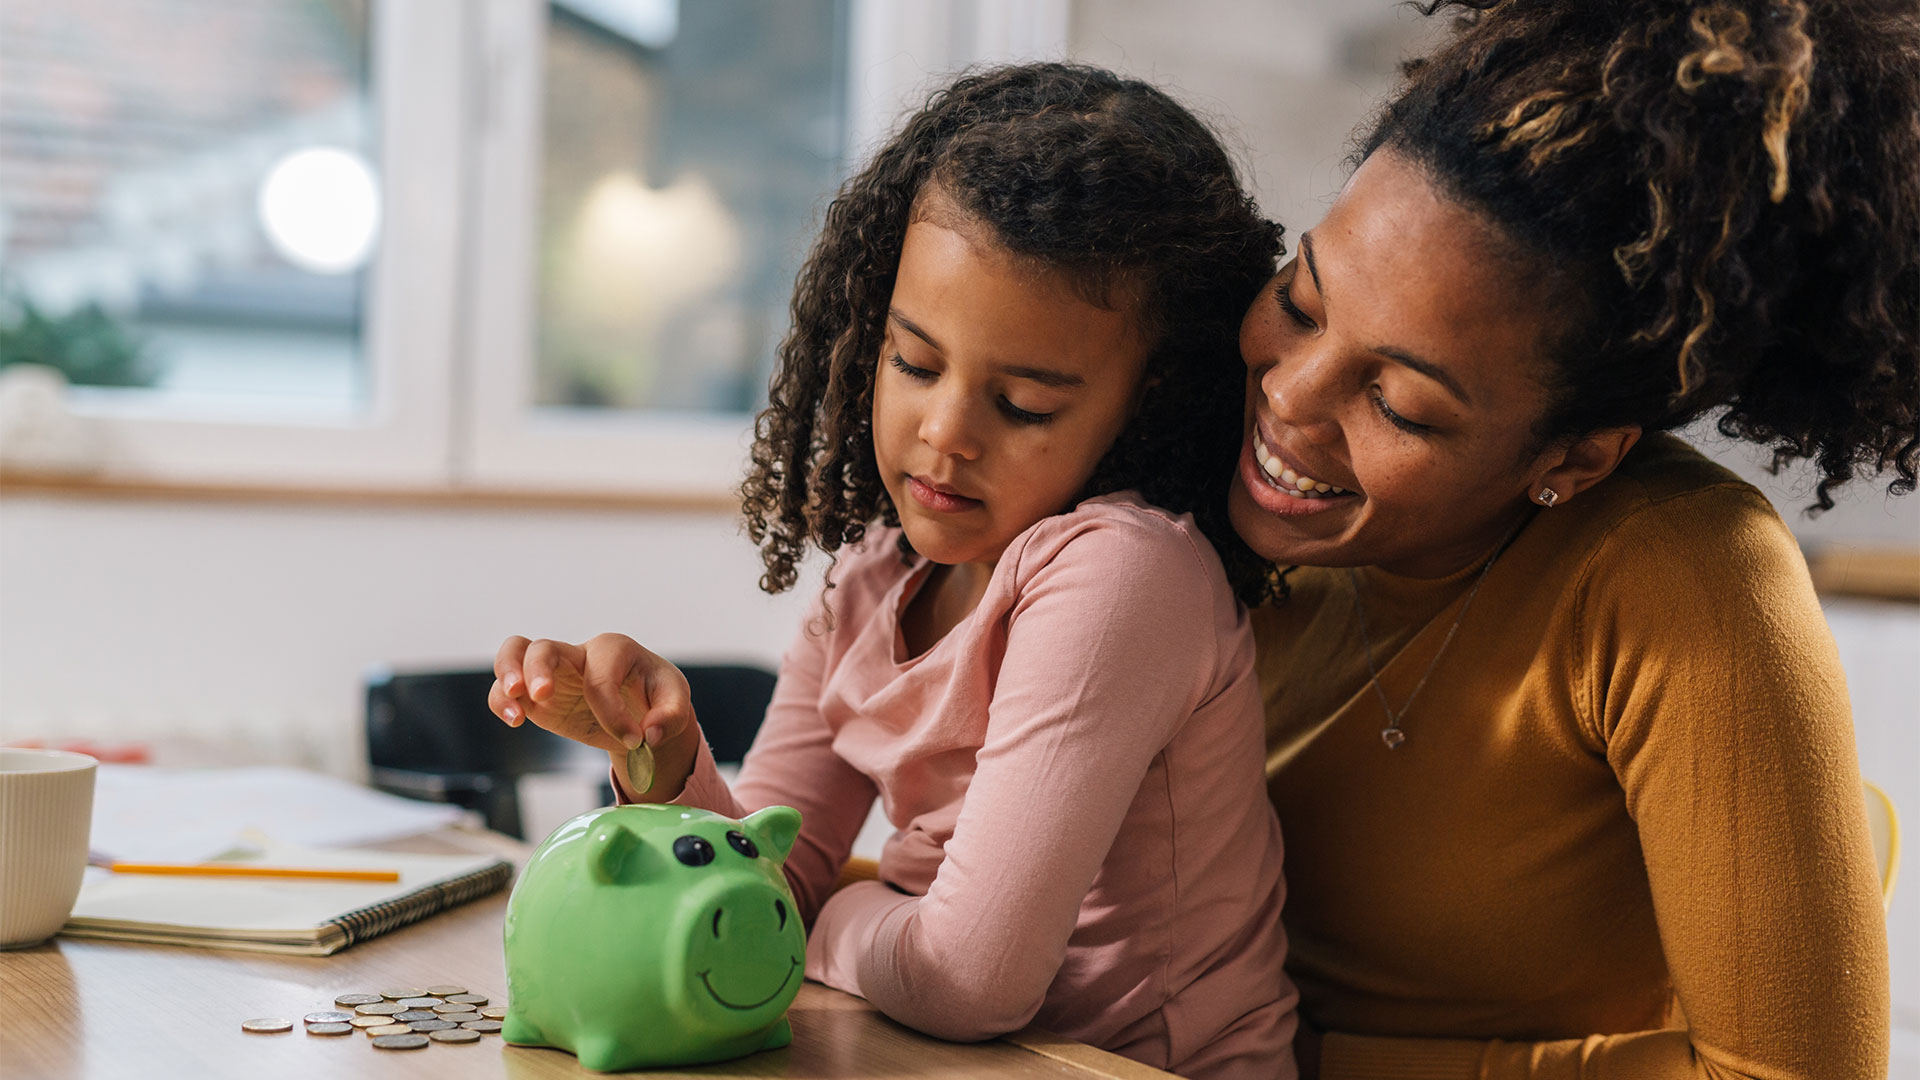 A mom smiles as she teaches her daughter how to save money by putting coins in a piggy bank.